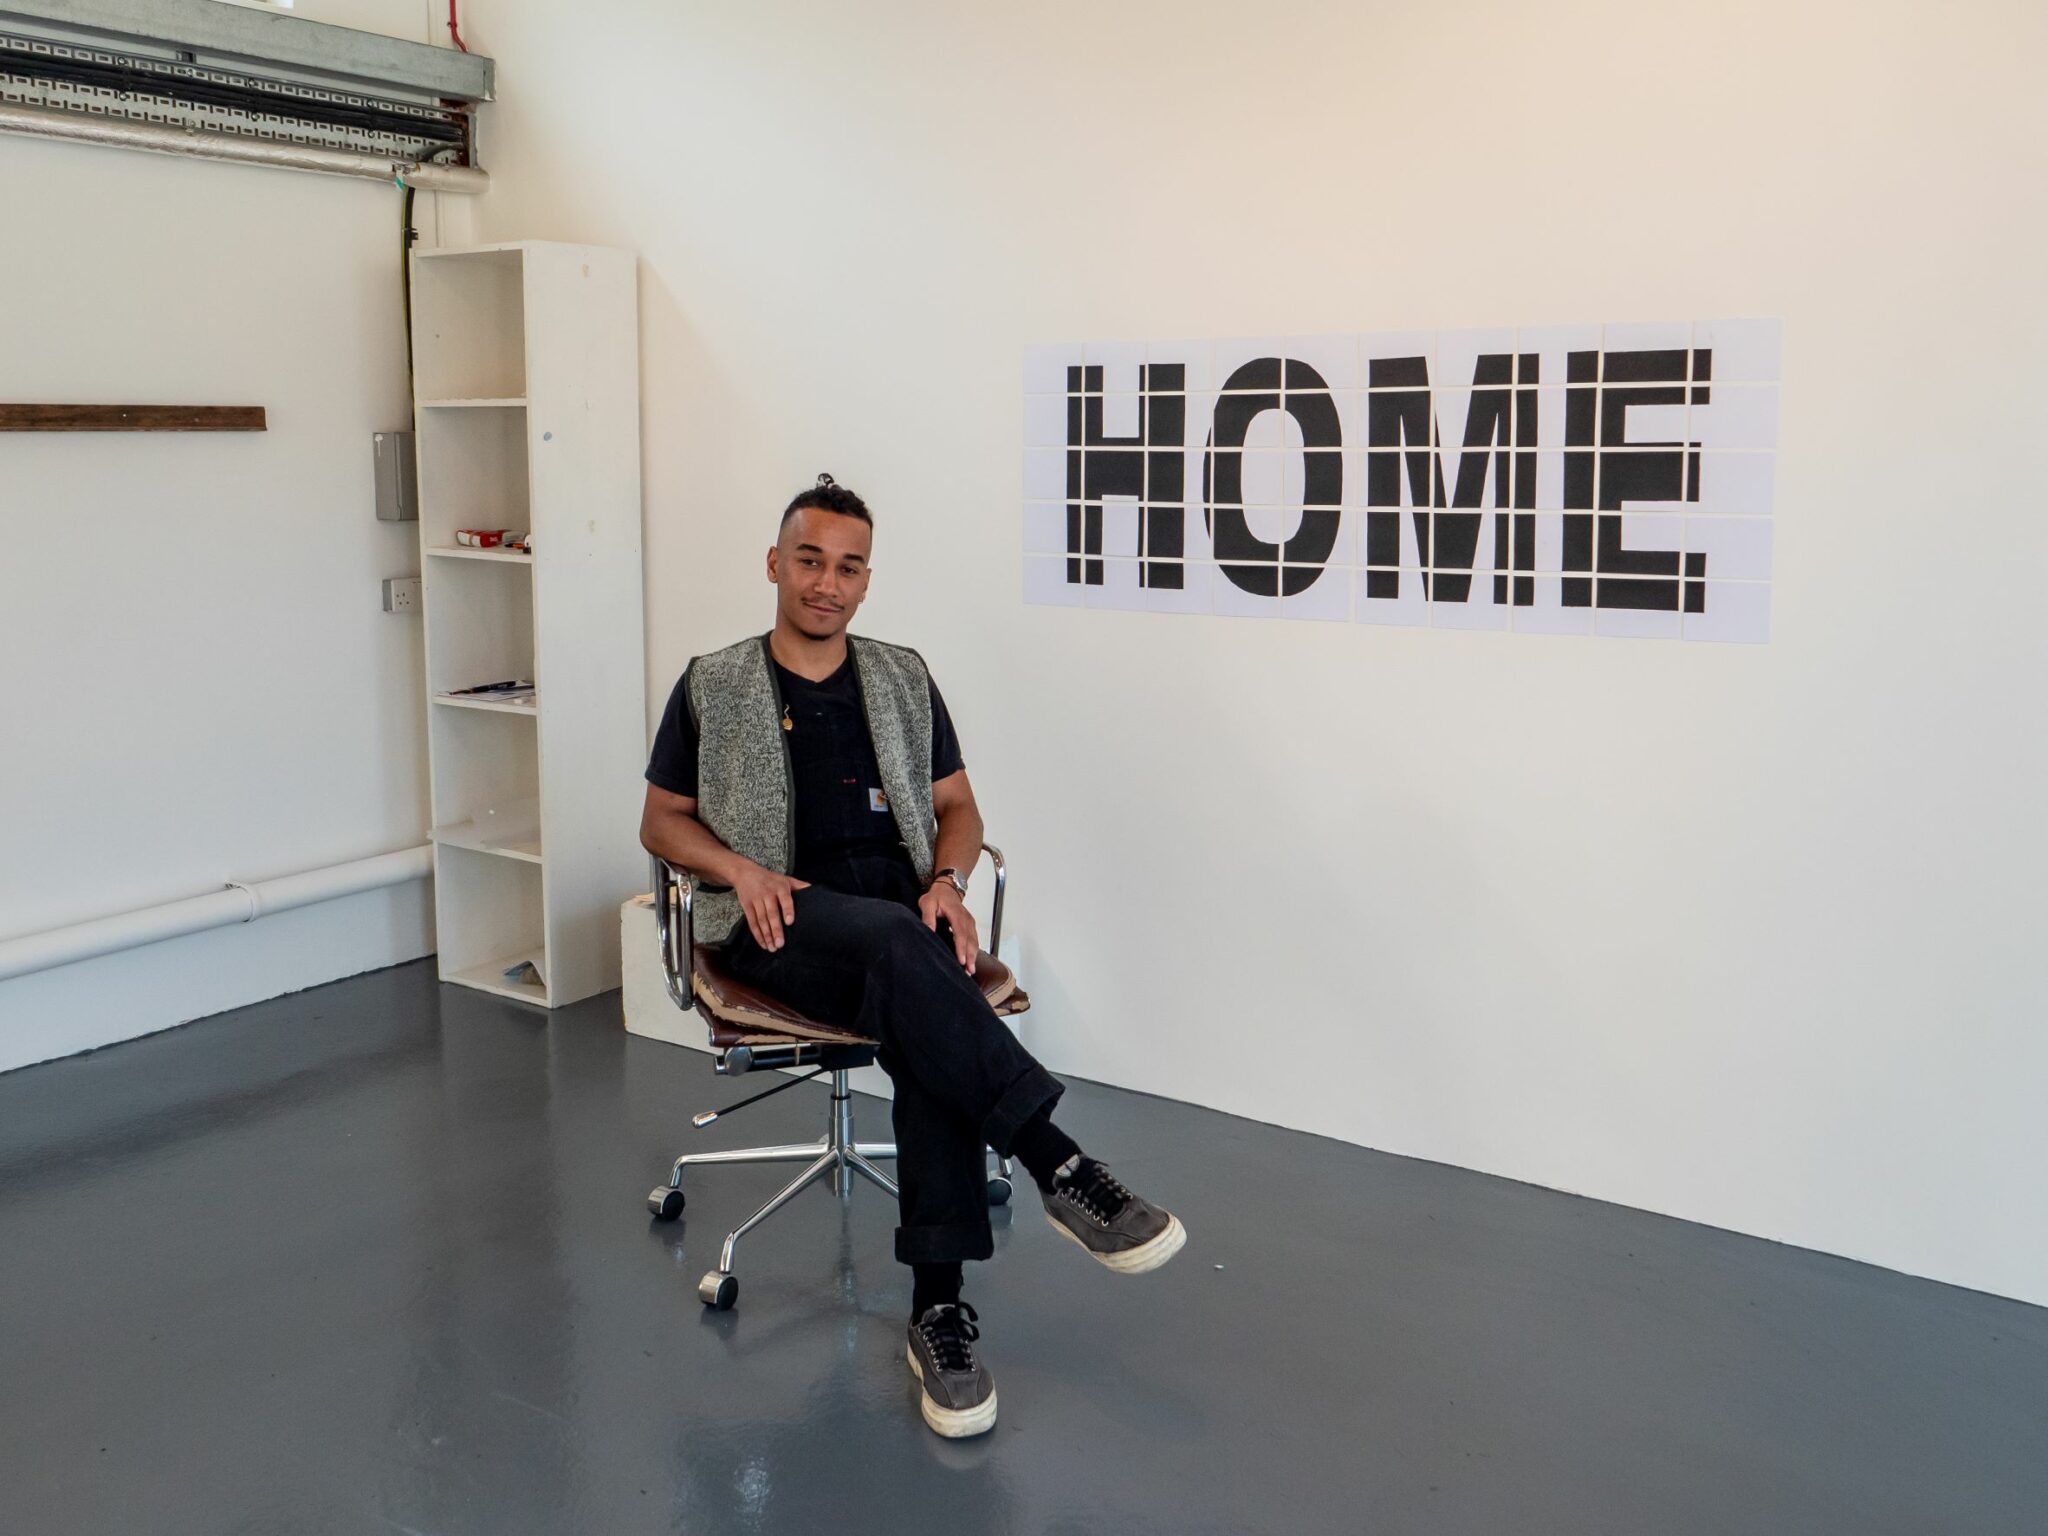 Programme participant sitting on a chair in their studio in front of a sign that reads 'HOME'